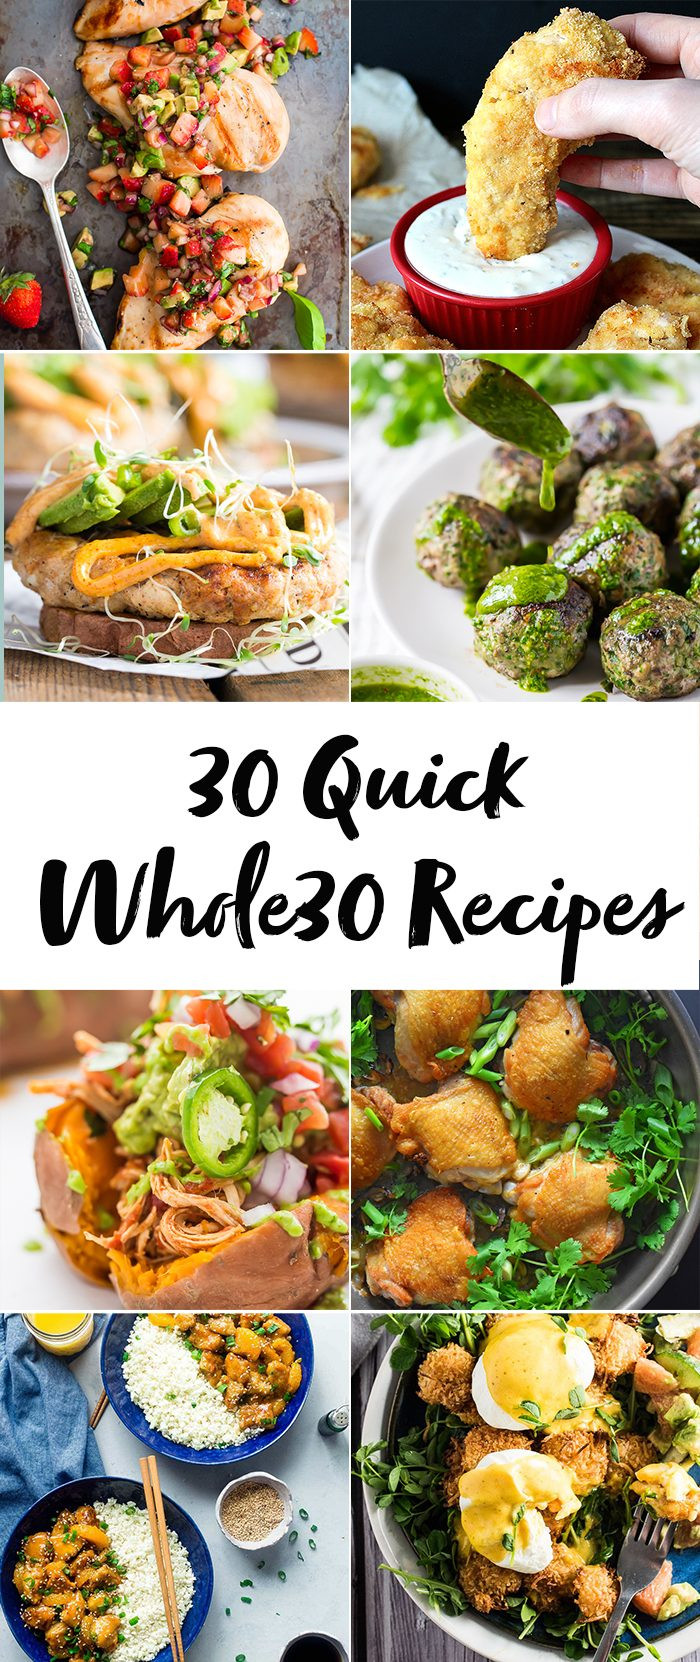 Pinterest Dinner Ideas
 30 Quick Whole30 Recipes Whole30 Dinner Recipes